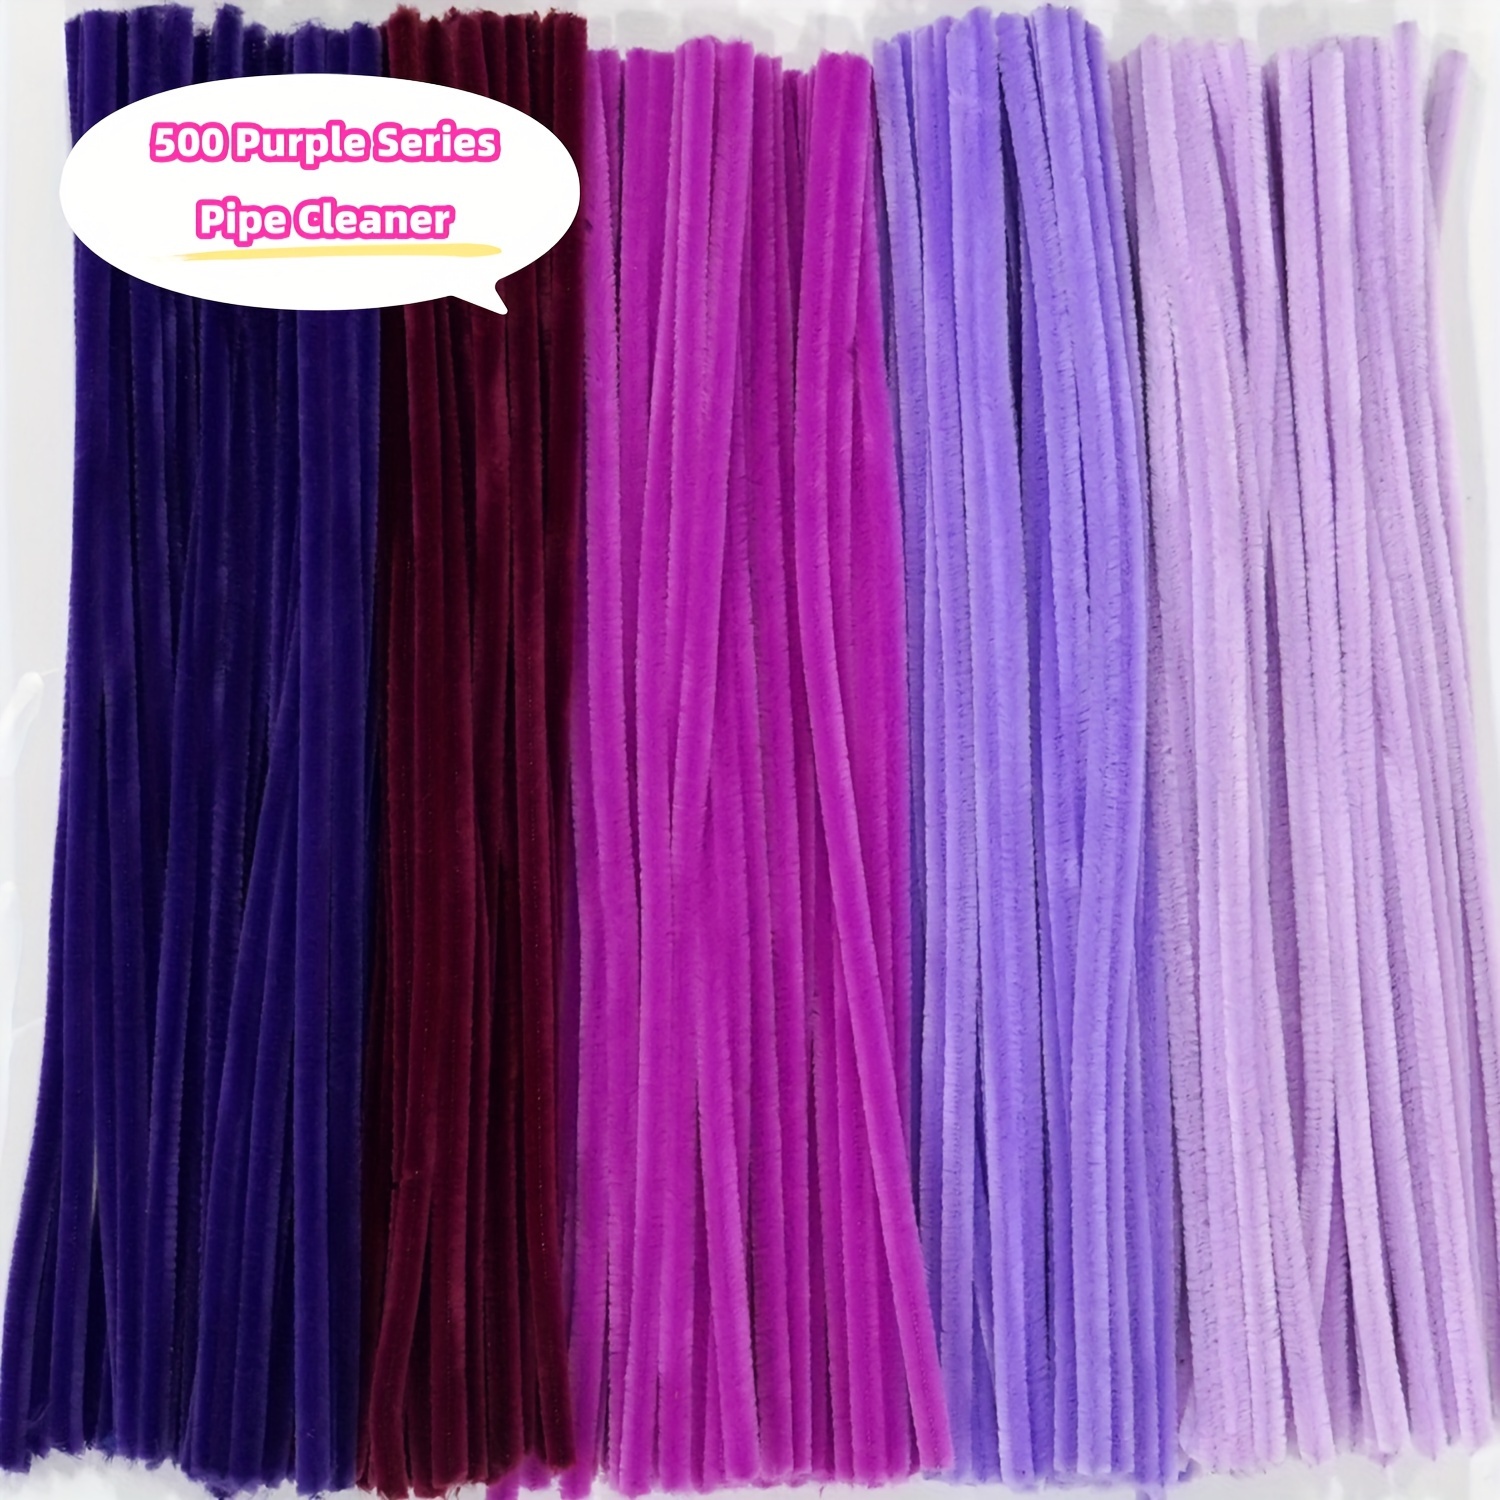 

500pcs Pipe Cleaner Chenille Sticks 5 Different Purples, 100 Sticks Each, 12 Inches Crafts Bulk Diy Art & Craft Project Creative Gift Packaging Party Decoration